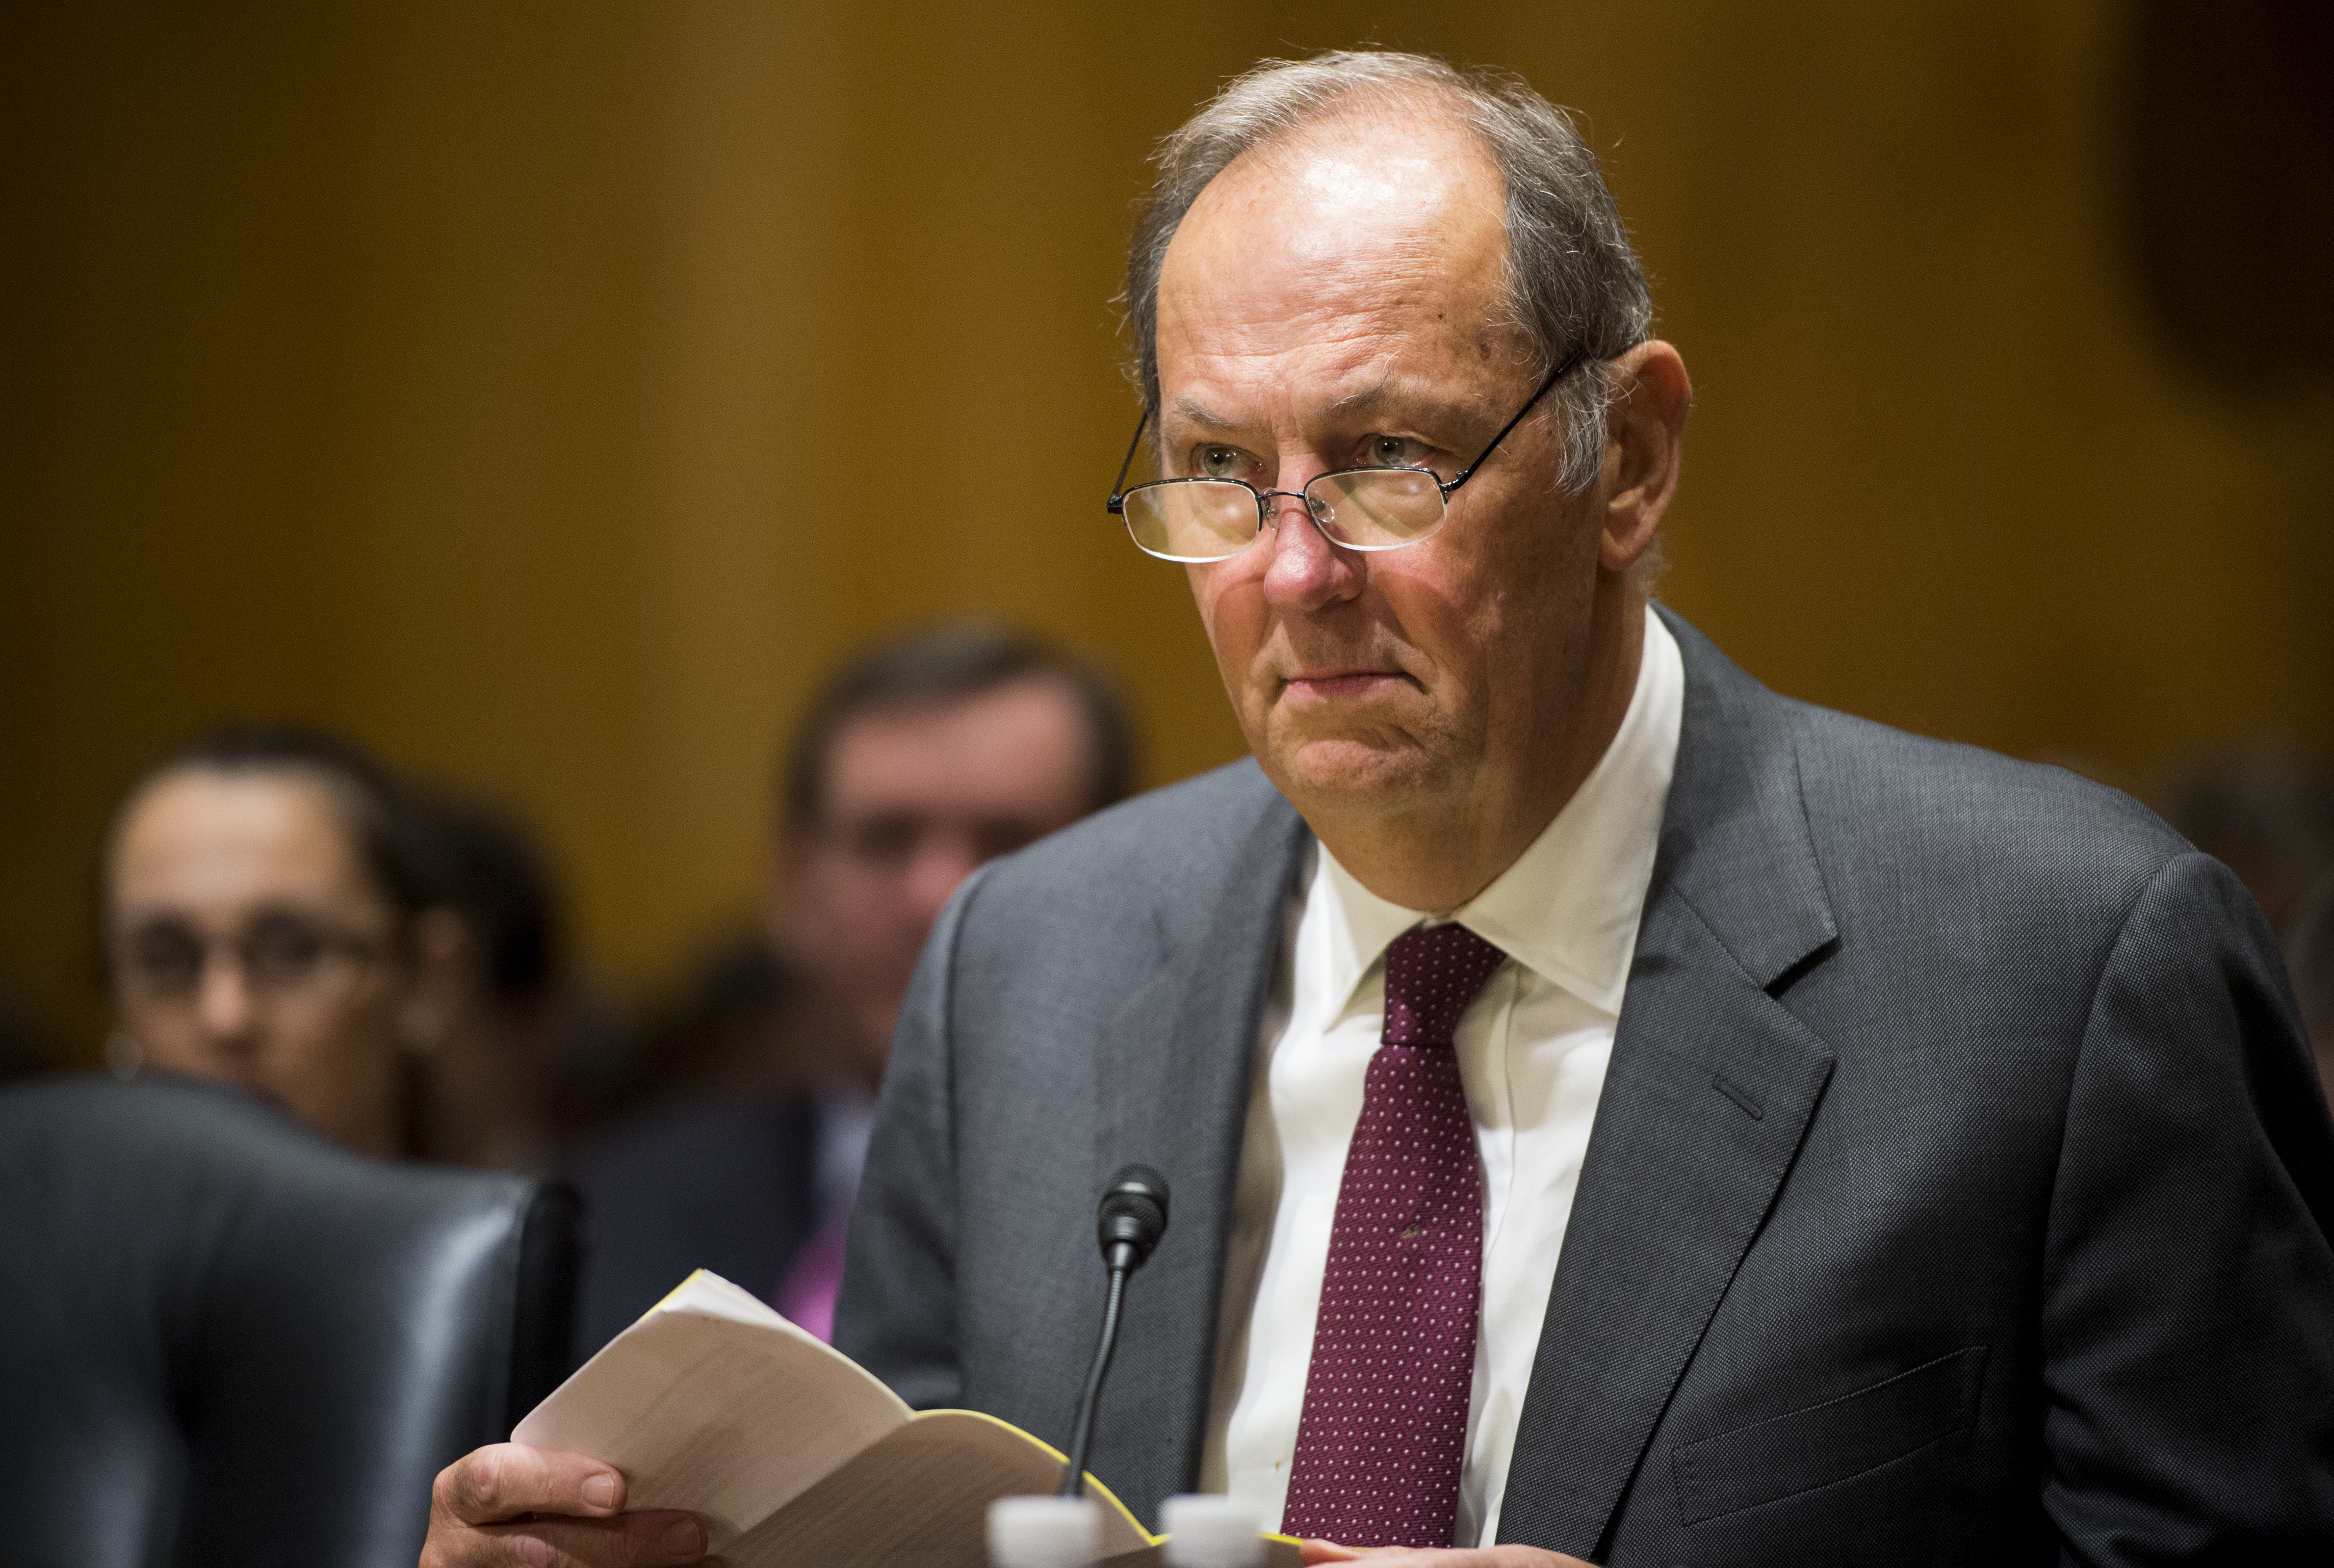 Former Sen. Bill Bradley, D-N.J., takes his seat for the Senate Finance Committee hearing on "Getting to Yes on Tax Reform: What Lessons Can Congress Learn from the Tax Reform Act of 1986?" on Tuesday, Feb. 10, 2015. (Bill Clark—CQ-Roll Call,Inc.)